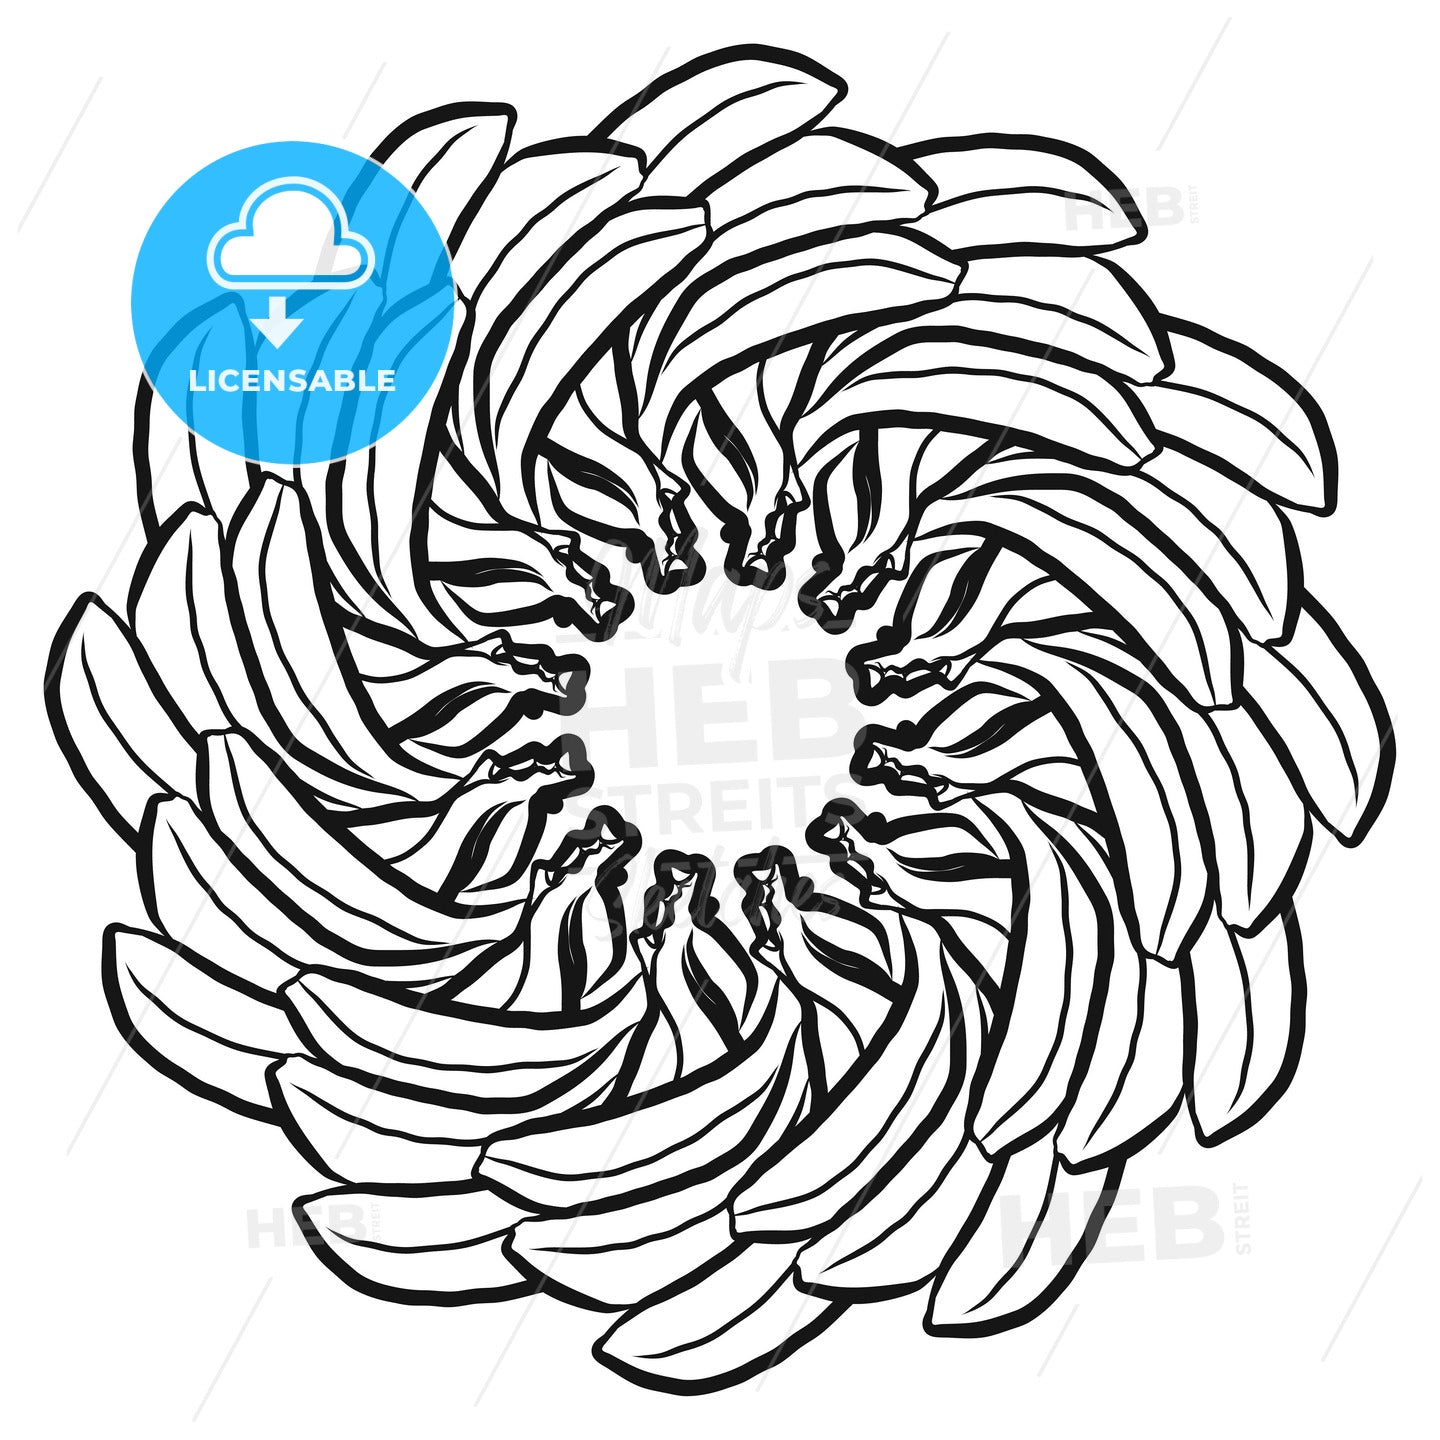 Outline sketch of bananas arranged in a circle – instant download